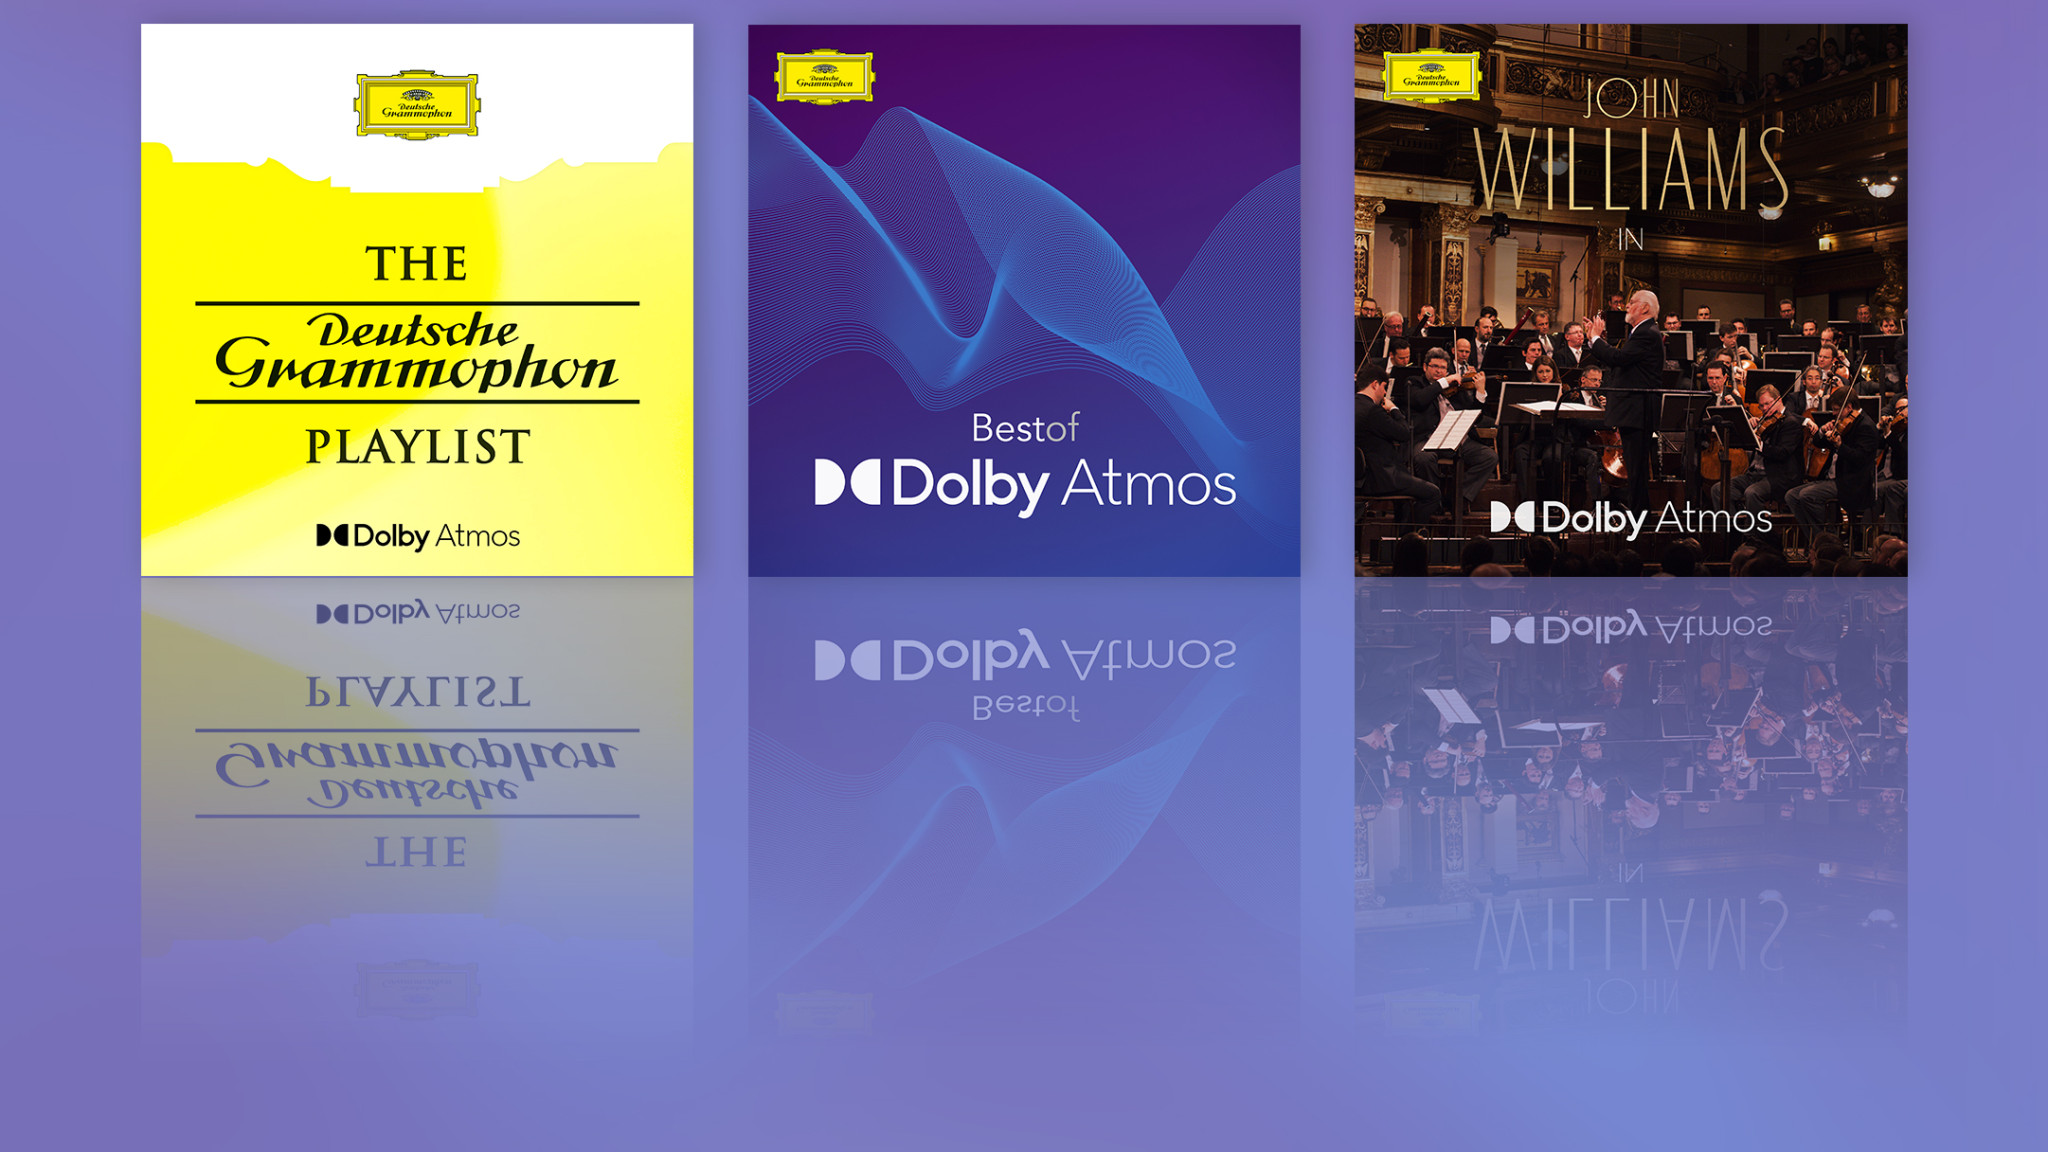 The DG Playlist, Best of Dolby Atmos, John Williams in Dolby Atmos